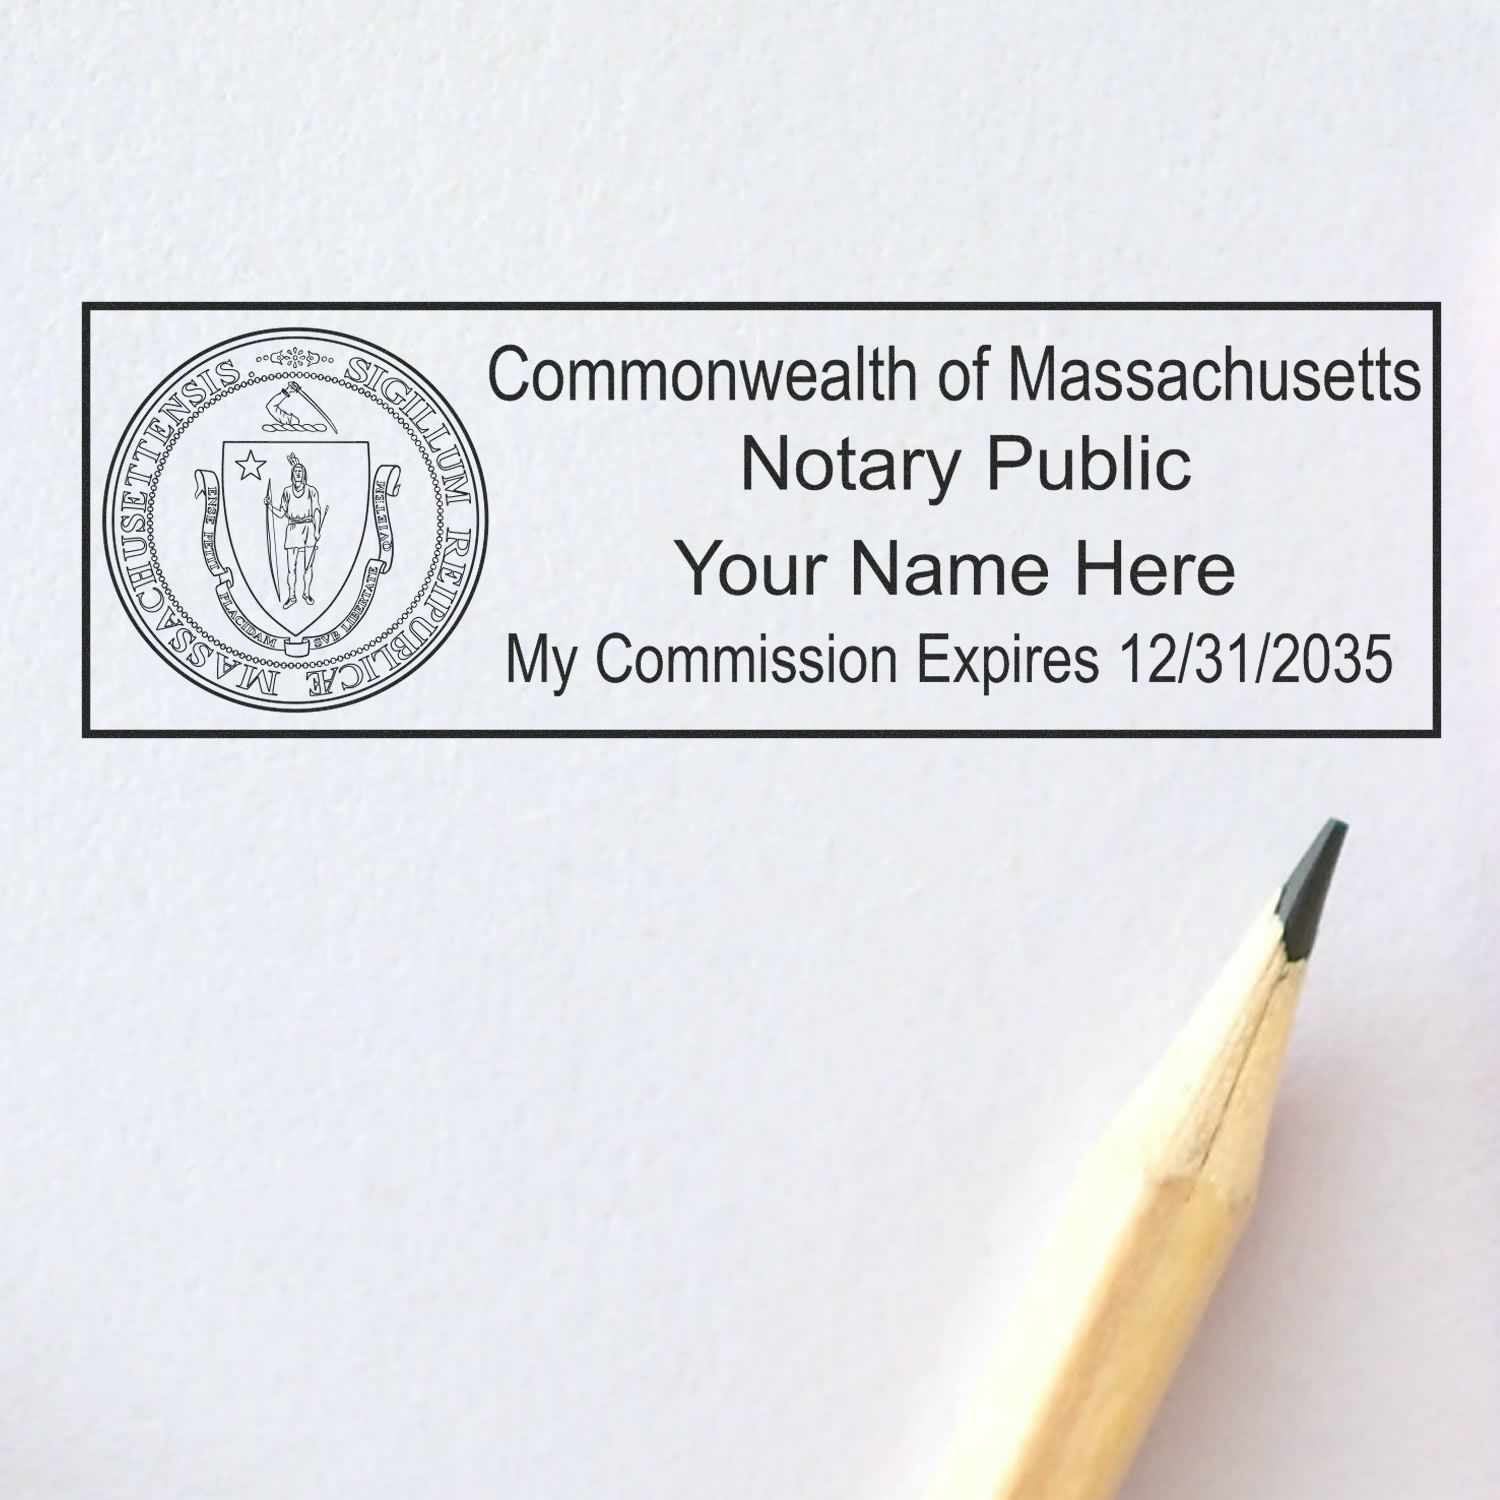 The main image for the PSI Massachusetts Notary Stamp depicting a sample of the imprint and electronic files